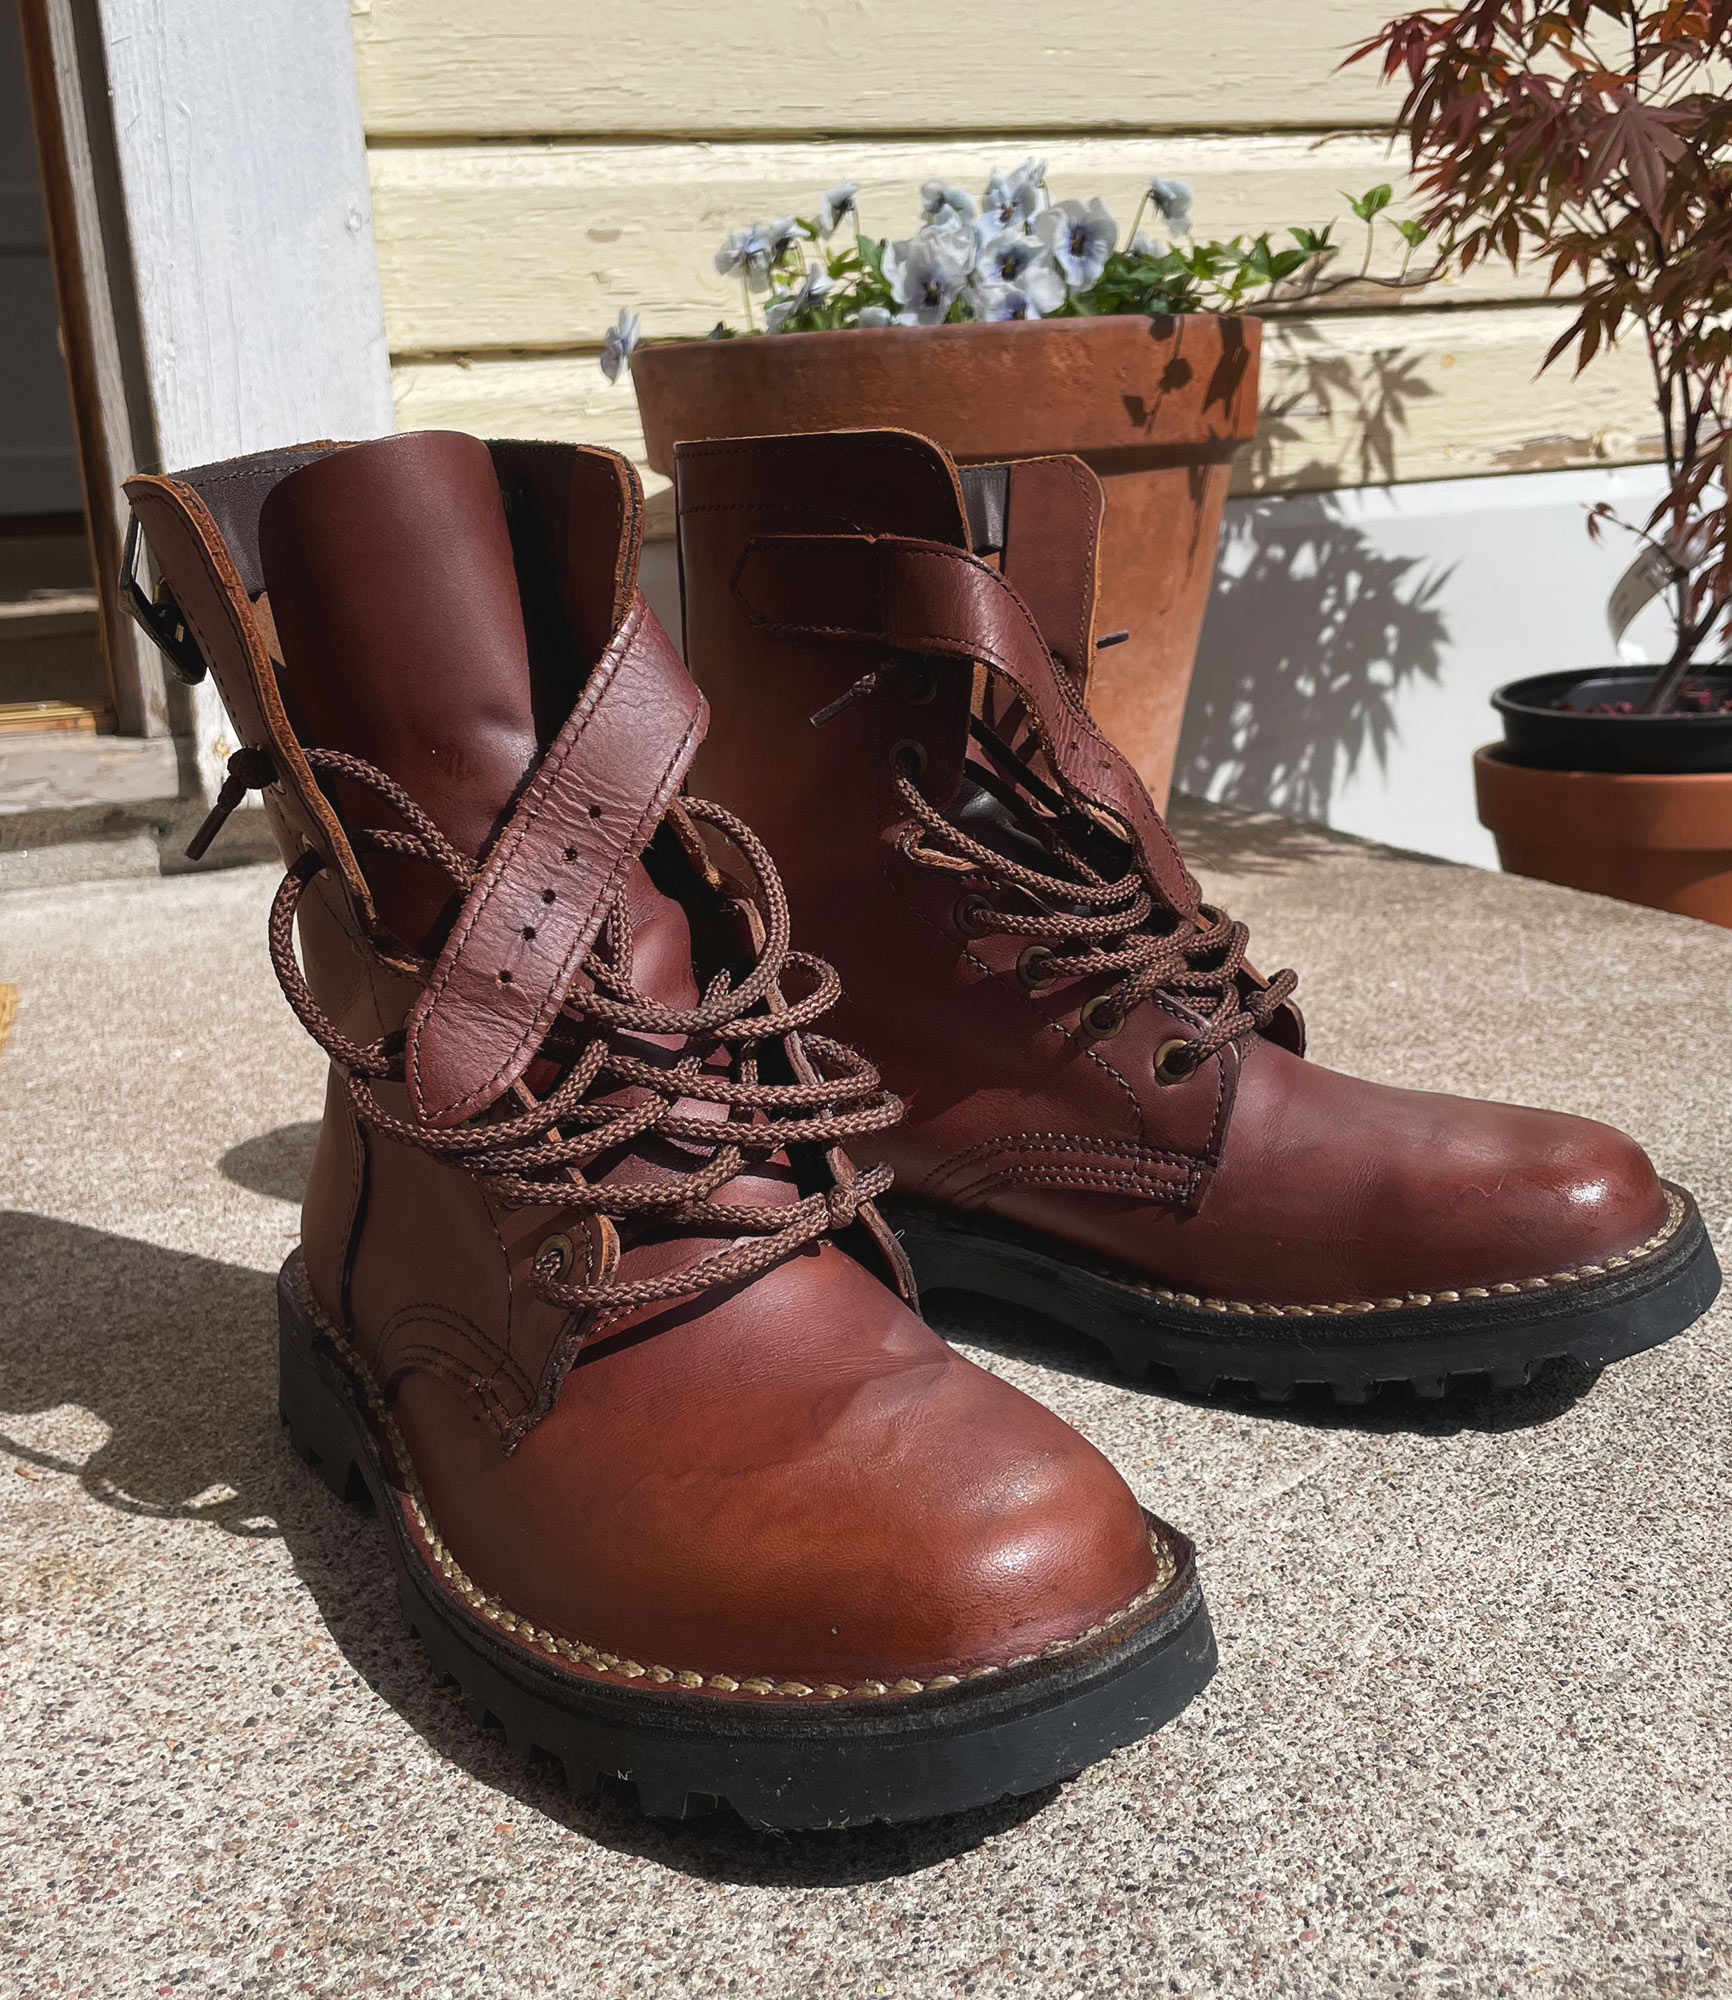 Freestyle RECCE Style Combat Boots, Brown - Varusteleka.com